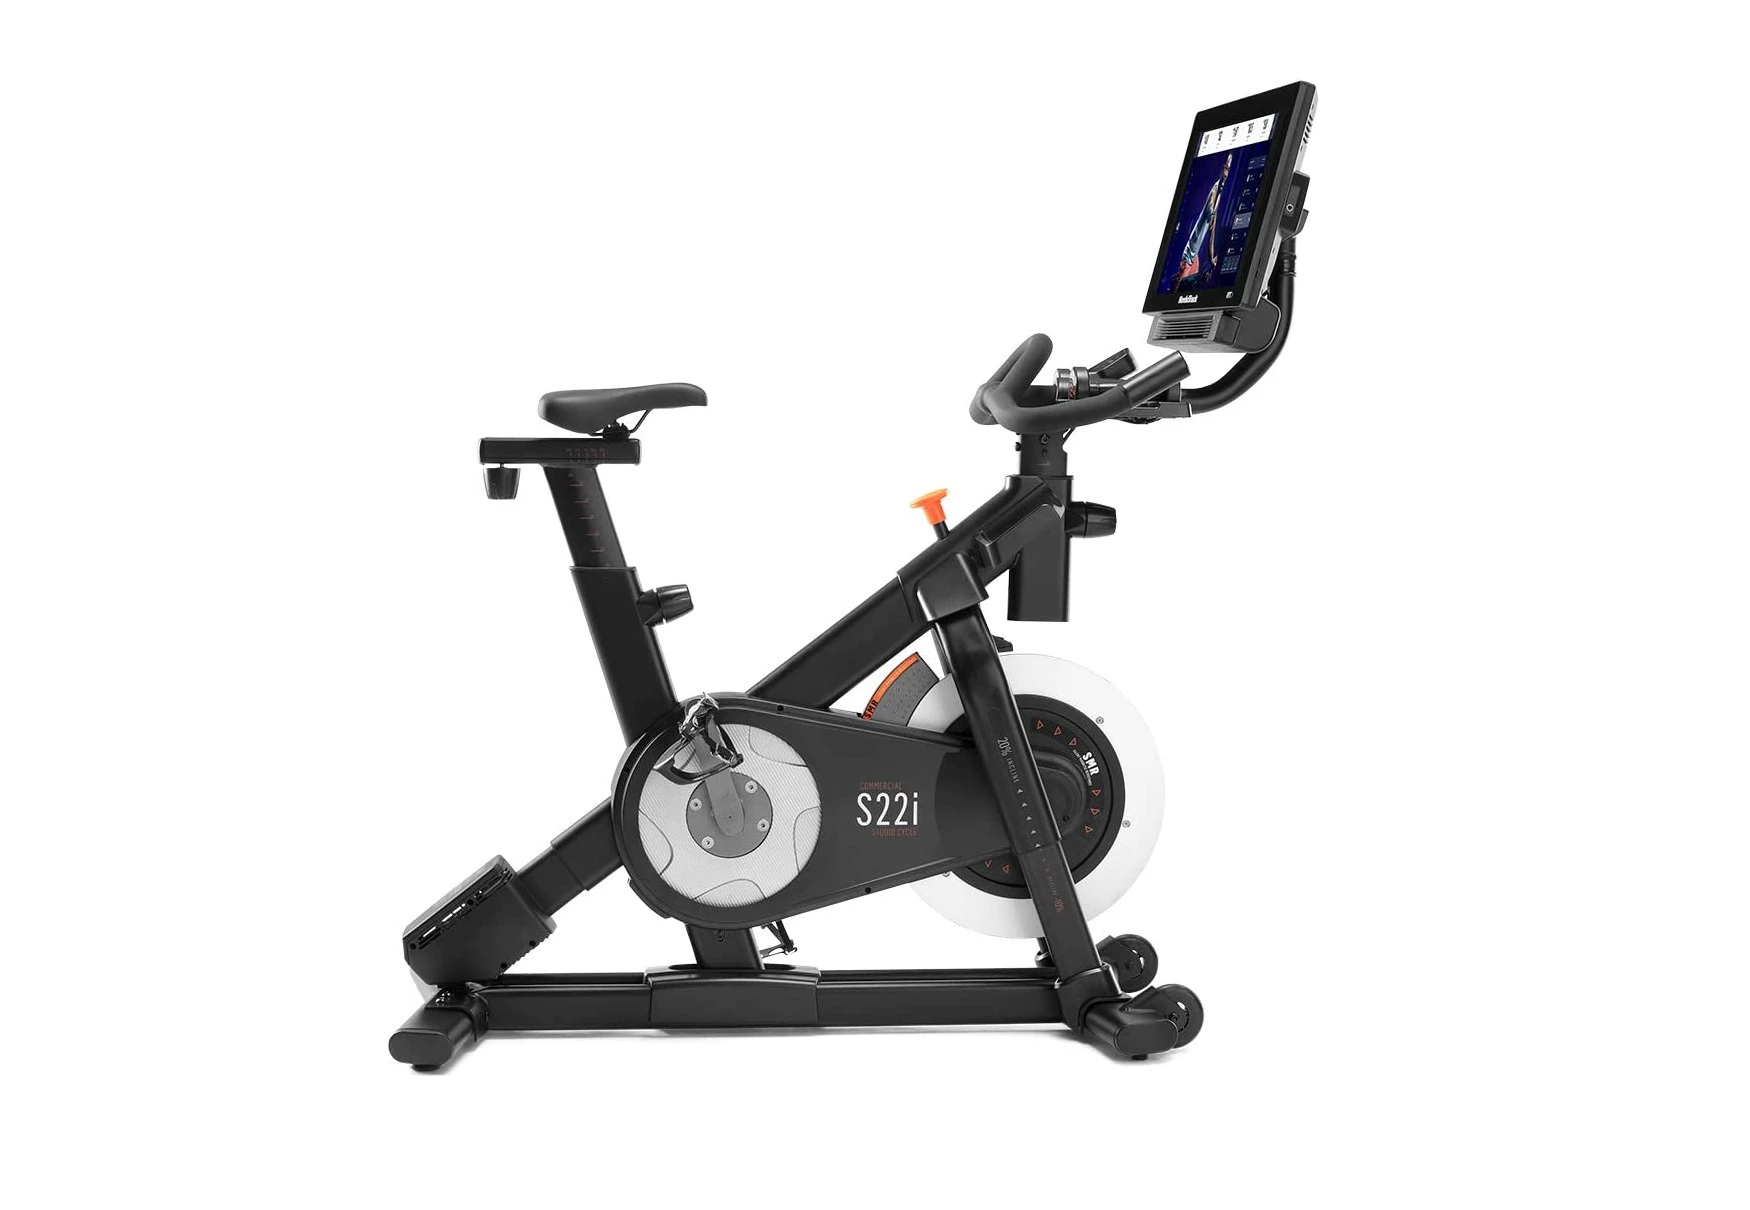 NordicTrack Commercial Studio Cycle: Best All-Around Exercise Bike